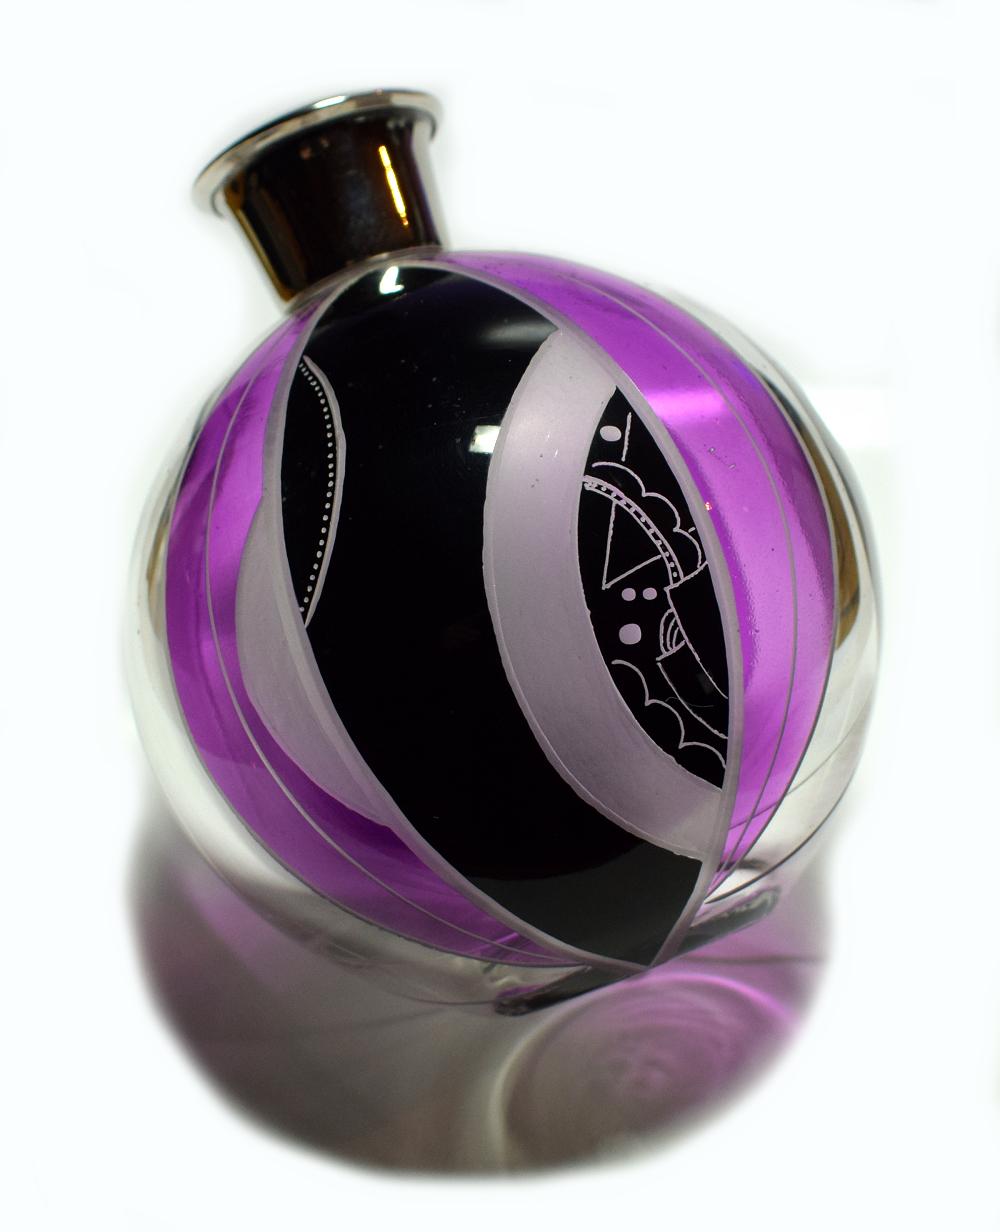 Such a rare find is this large globe shaped Art Deco perfume bottle by Karl Palda. Absolutely exquisite, every angle and side has a different design. I really can't sing the praises of this enough, if you want something beautiful in your life then